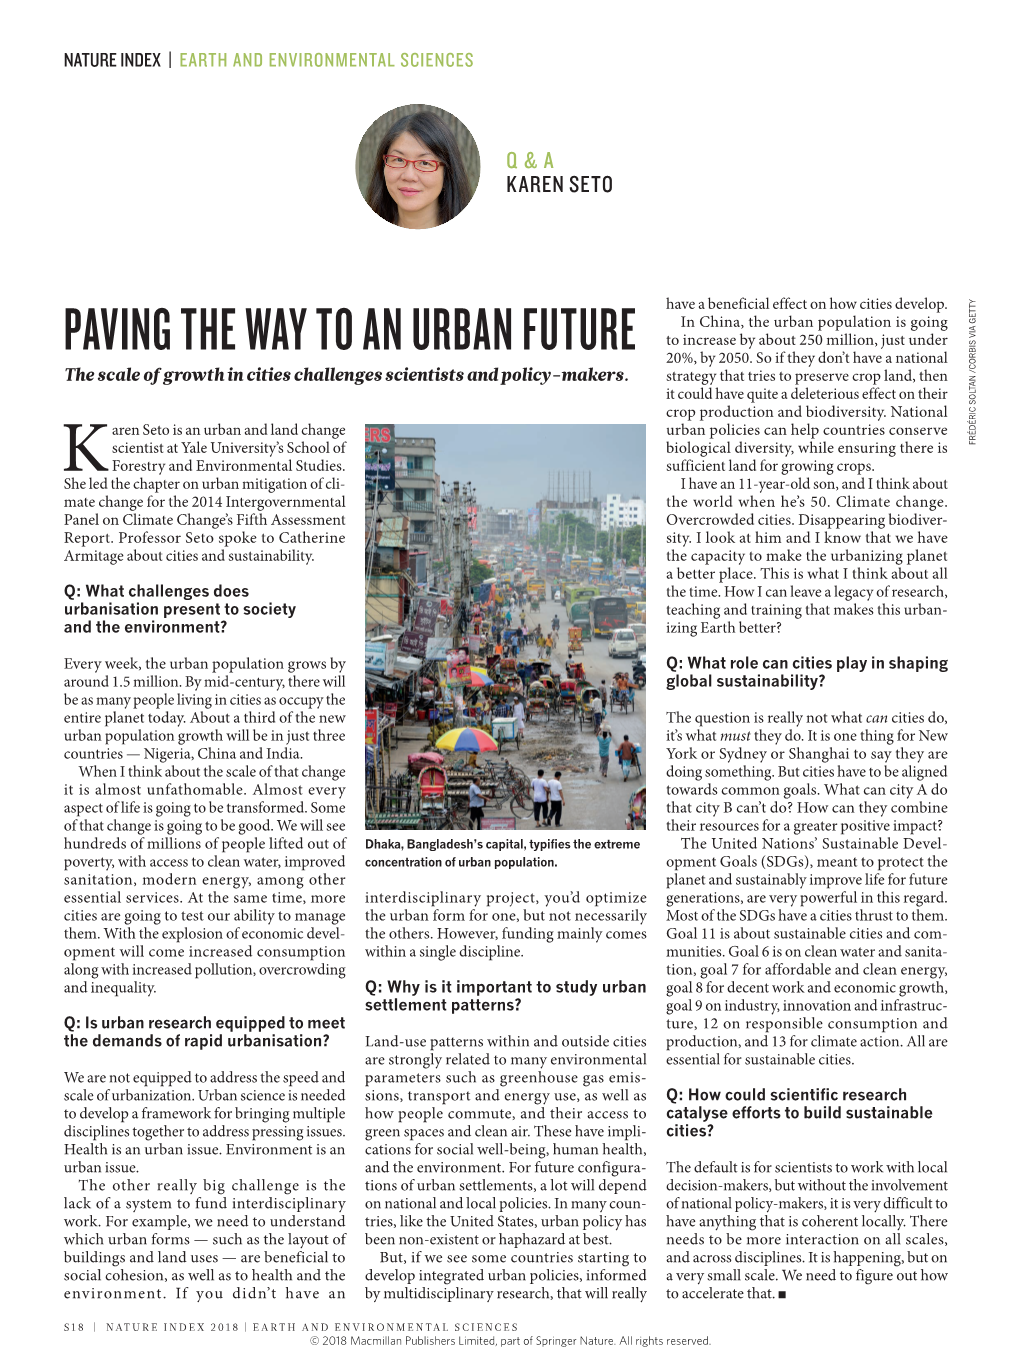 PAVING the WAY to an URBAN FUTURE to Increase by About 250 Million, Just Under 20%, by 2050